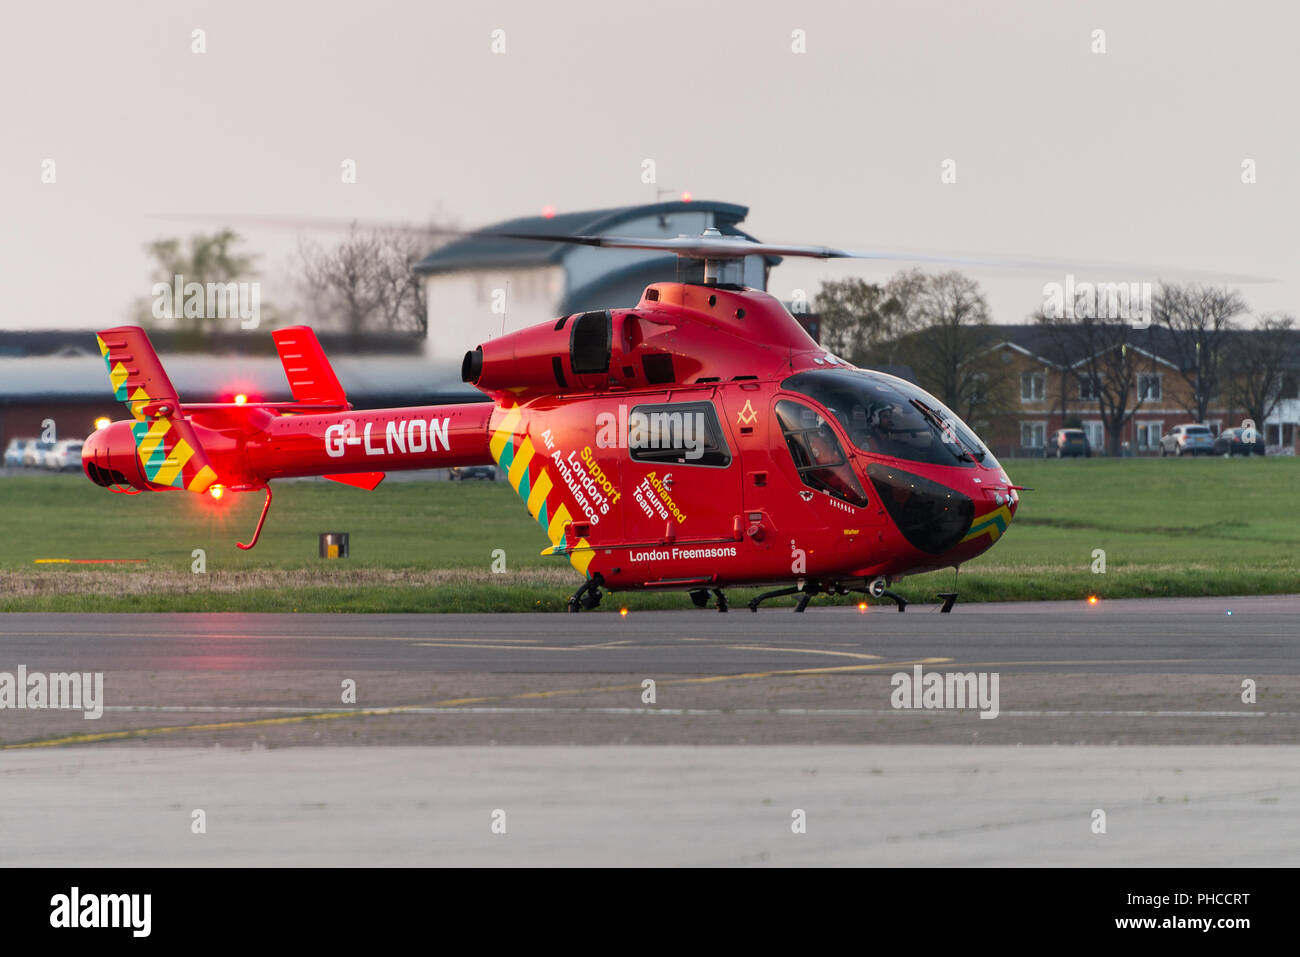 A MD 902 Explorer medical evacuation helicopter of the London's Air Ambulance. Stock Photo